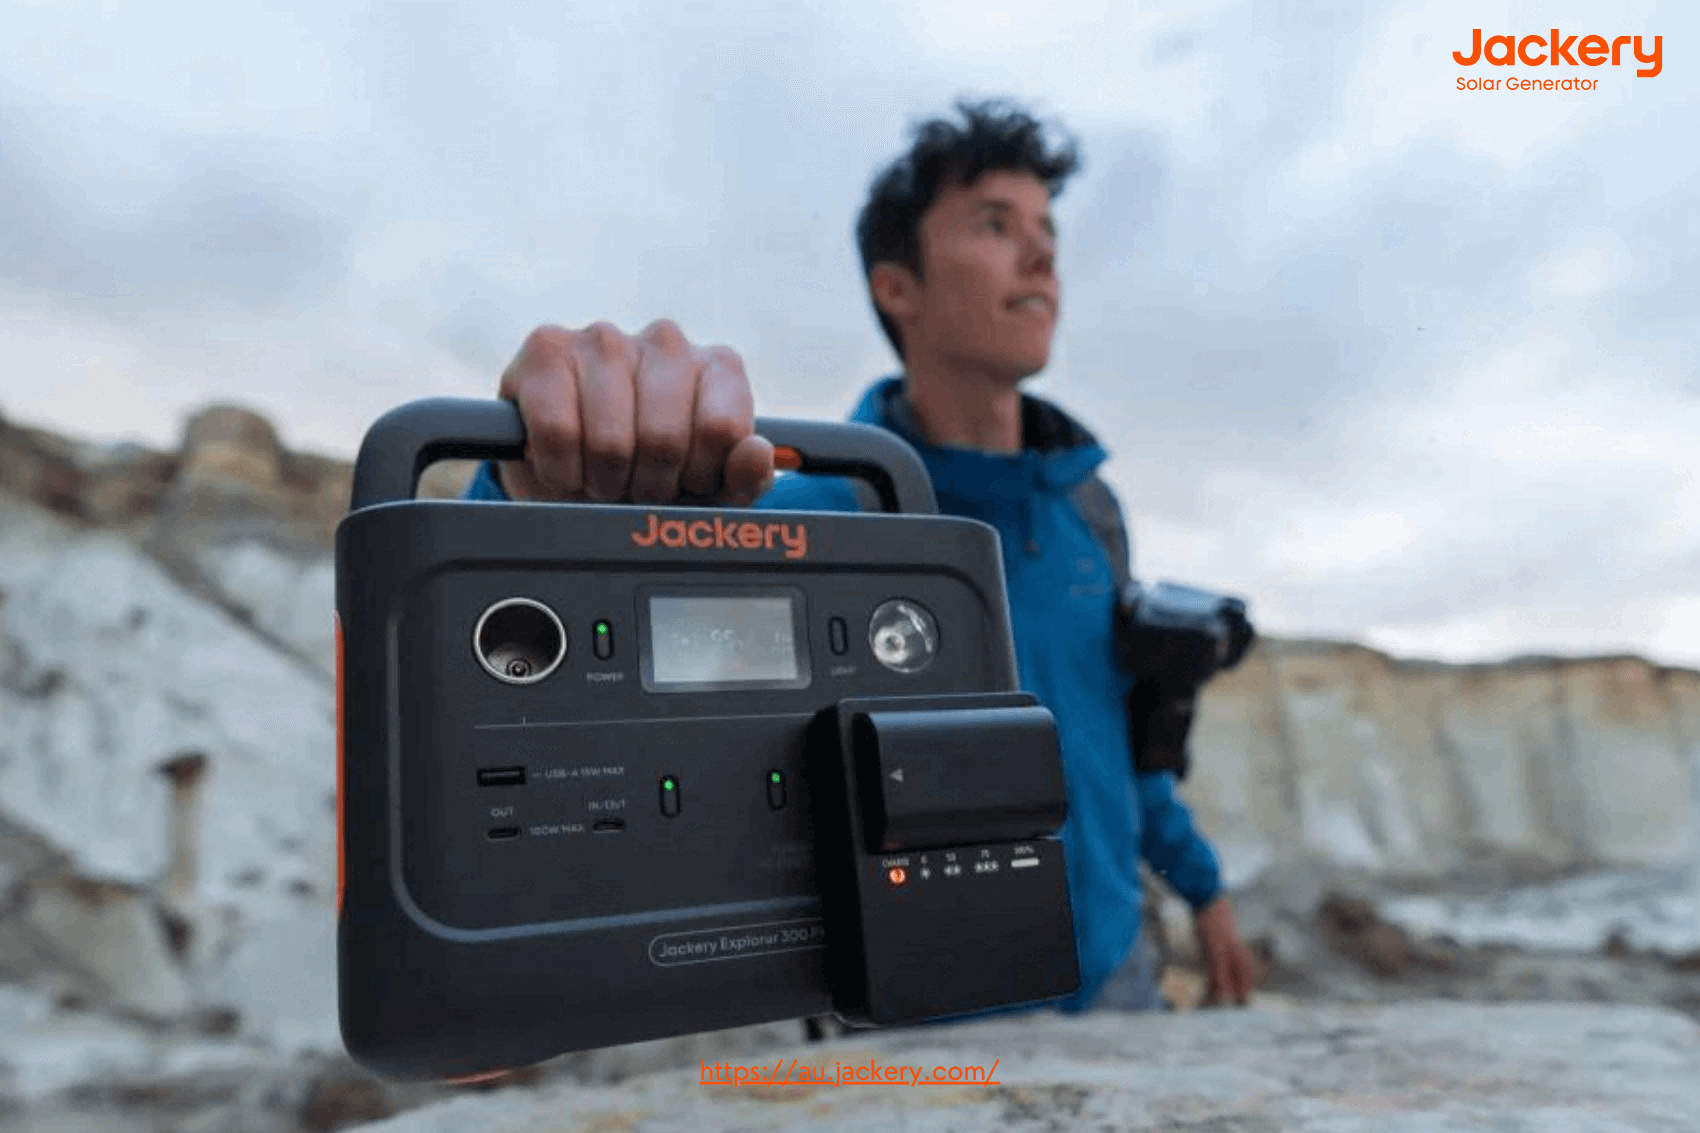 jackery portable power station for gopro